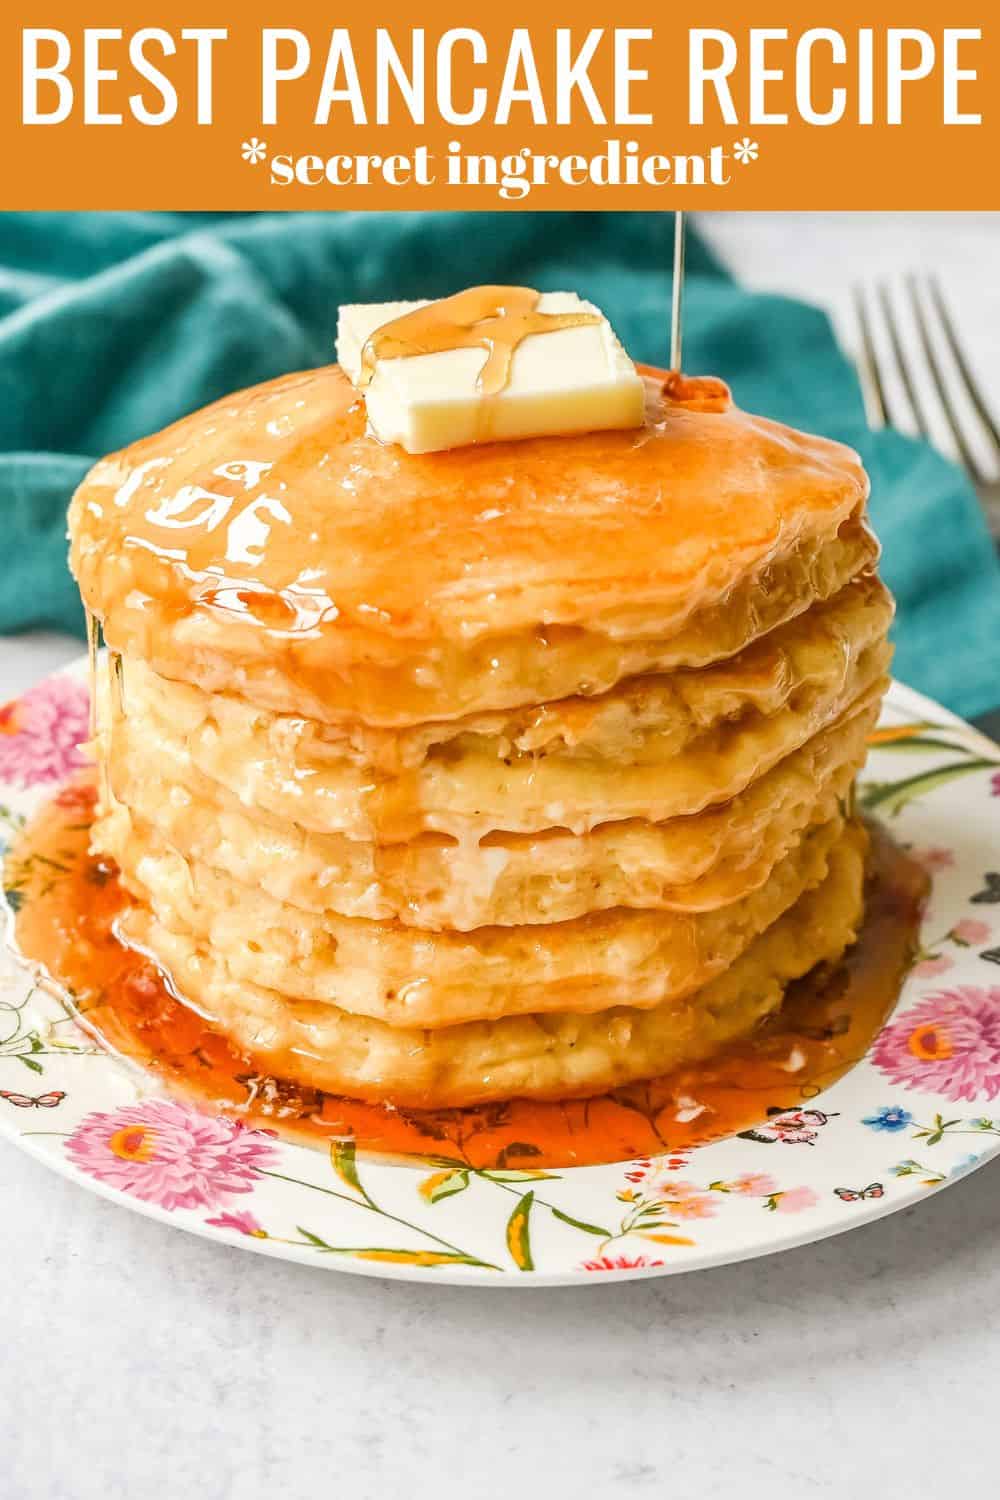 The Best Pancake Recipe. Light and fluffy buttermilk pancakes with a secret ingredient to make it extra tender. These sour cream pancakes are the only pancake recipe you will ever need!